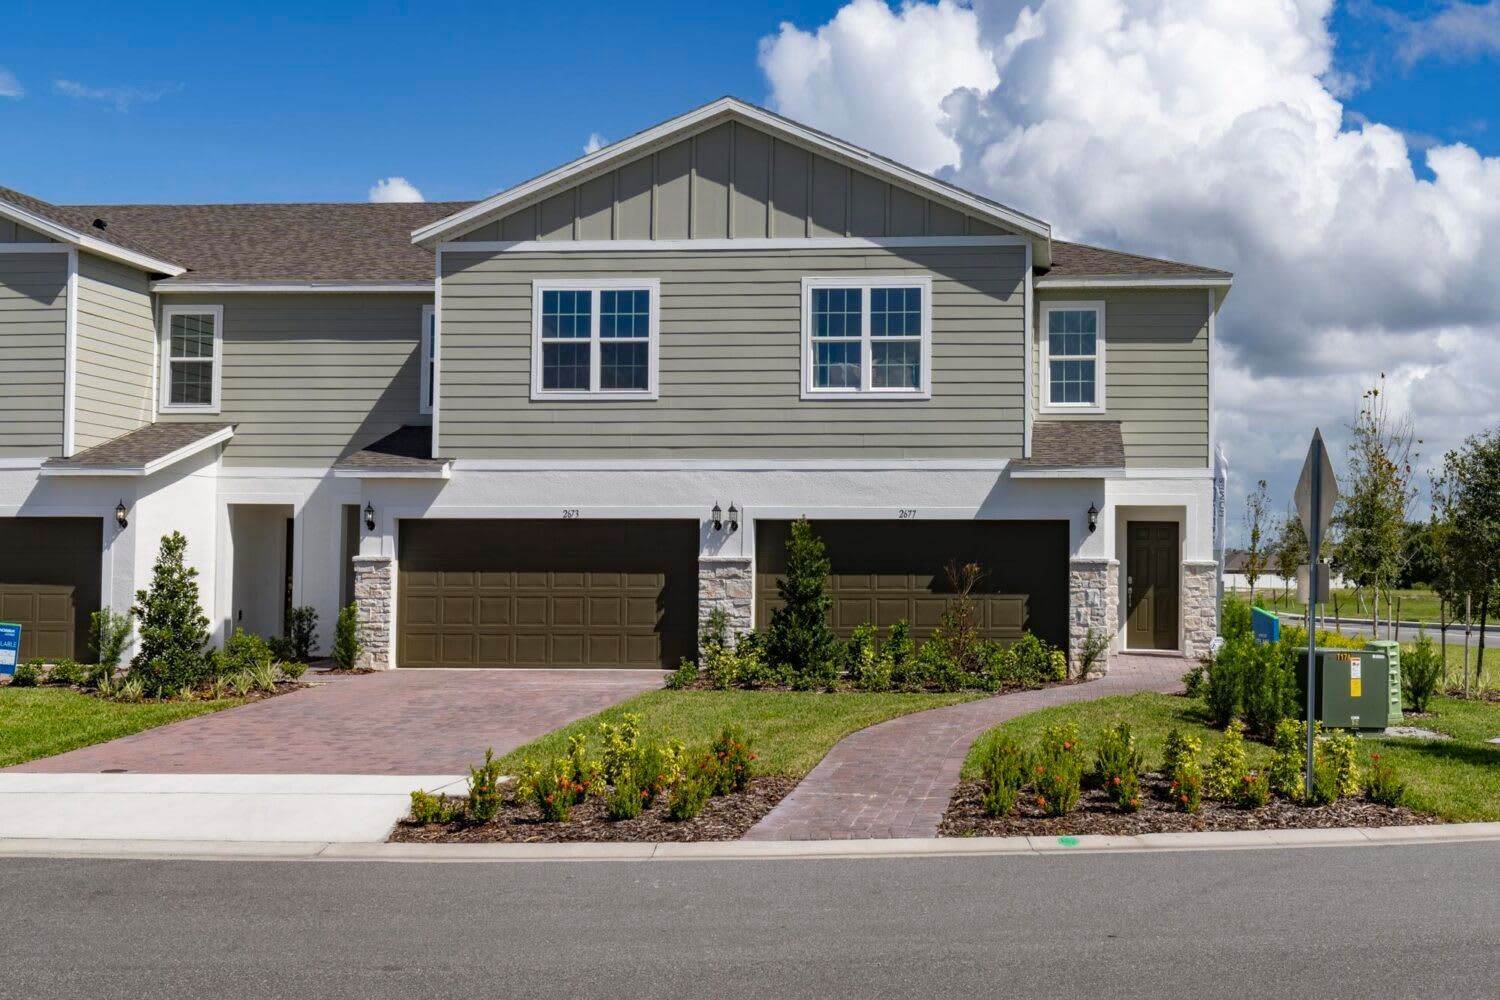 Michigan Ave (Behind St. Cloud High School), St. Cloud, FL 34769에 Townhomes at Sky Lakes Estates 건물